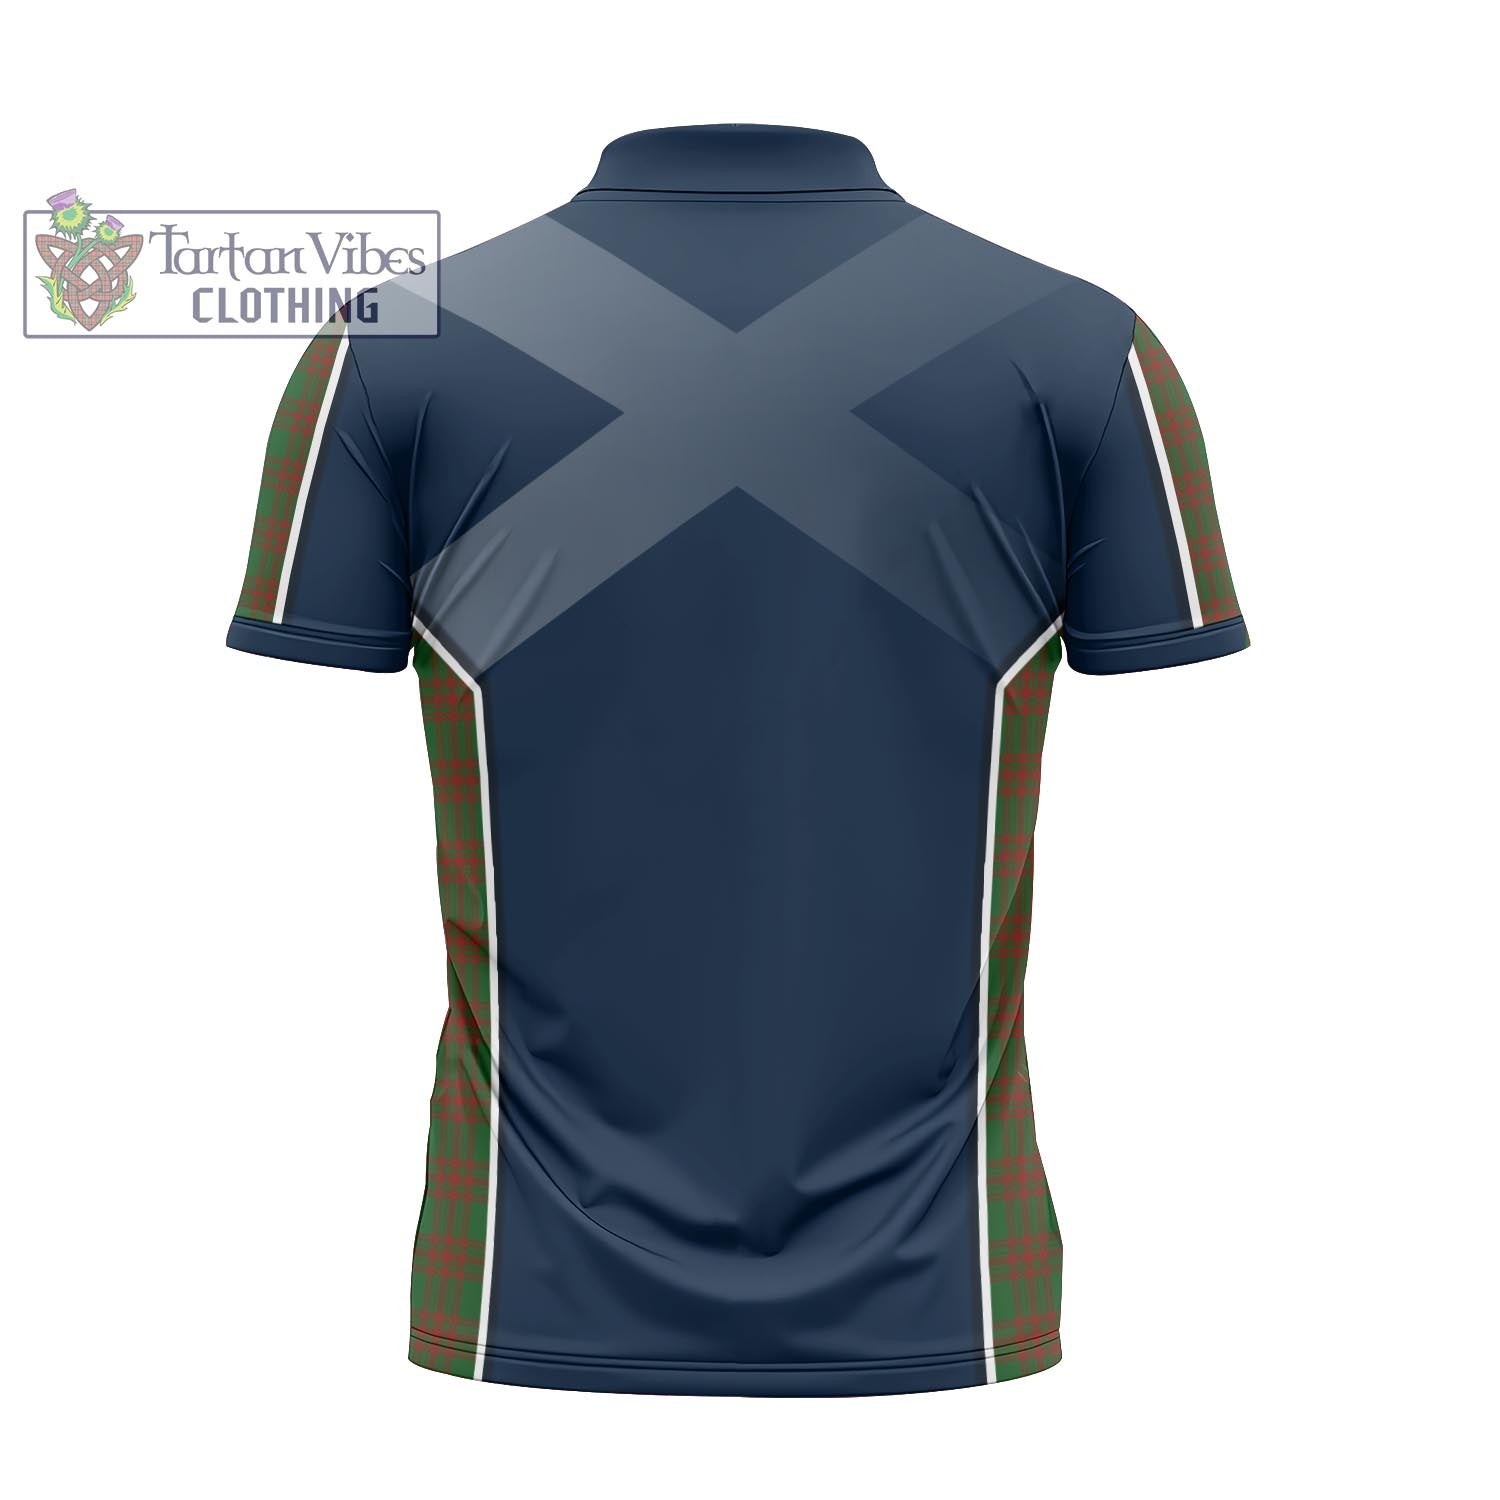 Tartan Vibes Clothing Menzies Tartan Zipper Polo Shirt with Family Crest and Scottish Thistle Vibes Sport Style